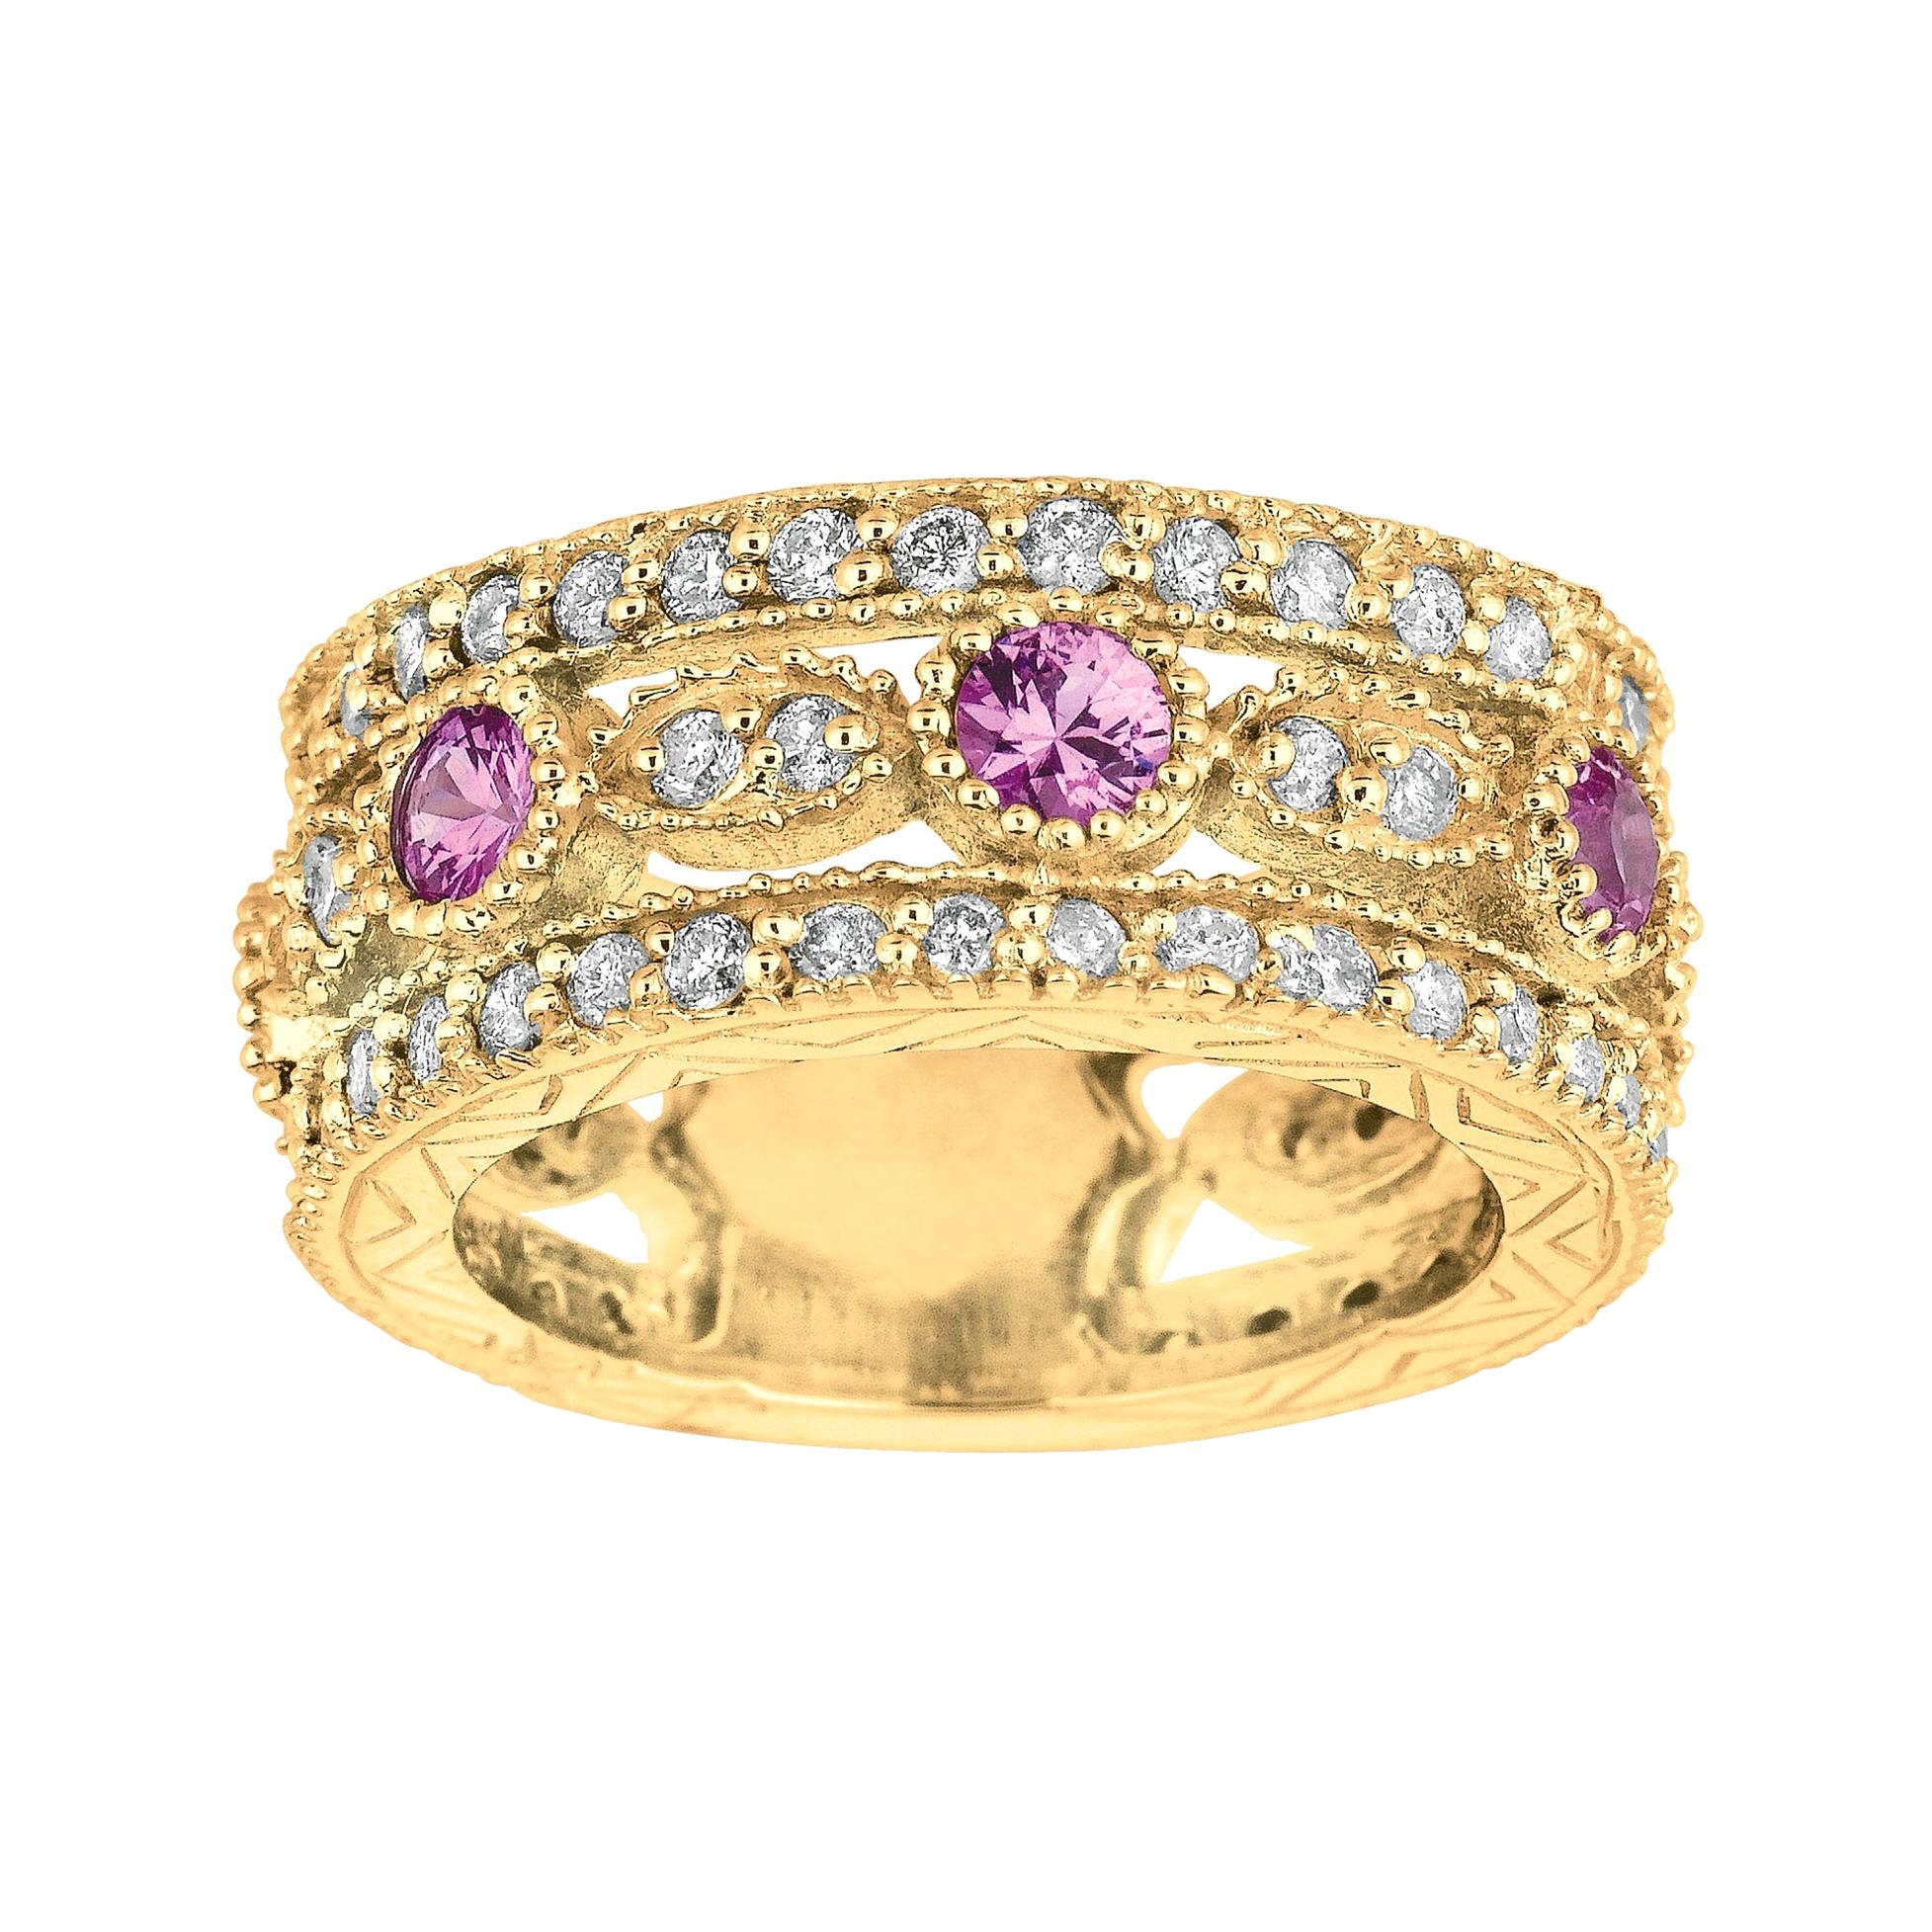 For Sale:  2.14 Carat Natural Pink Sapphire and Diamond Eternity Ring 14 Karat Yellow Gold